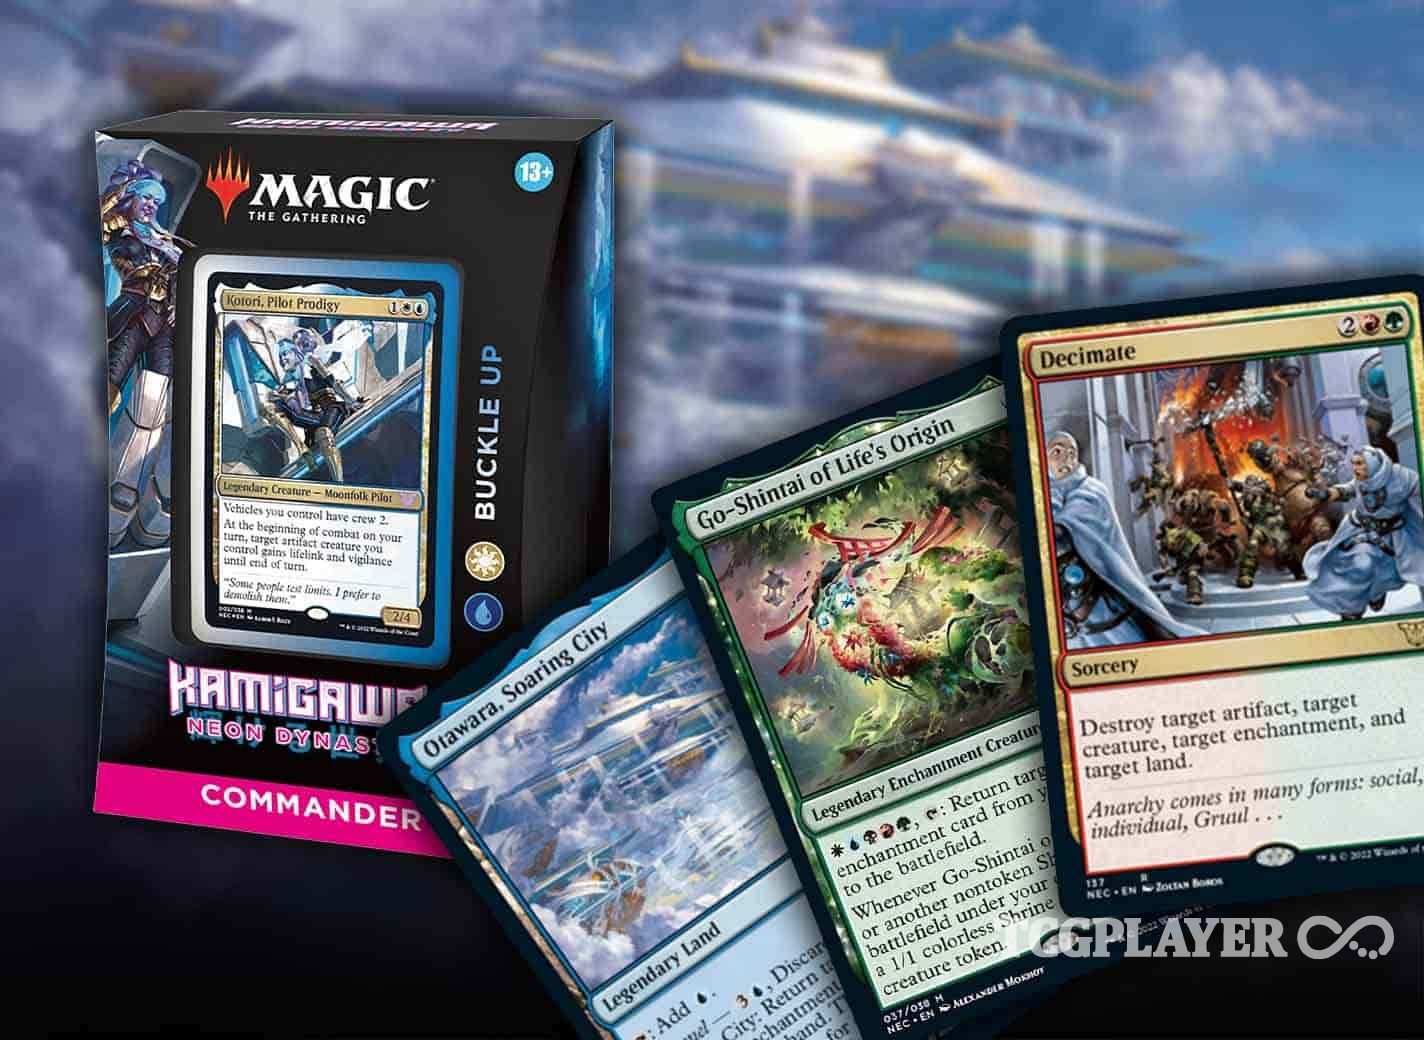 The Best Sealed Buys in Magic: The Gathering Right Now!